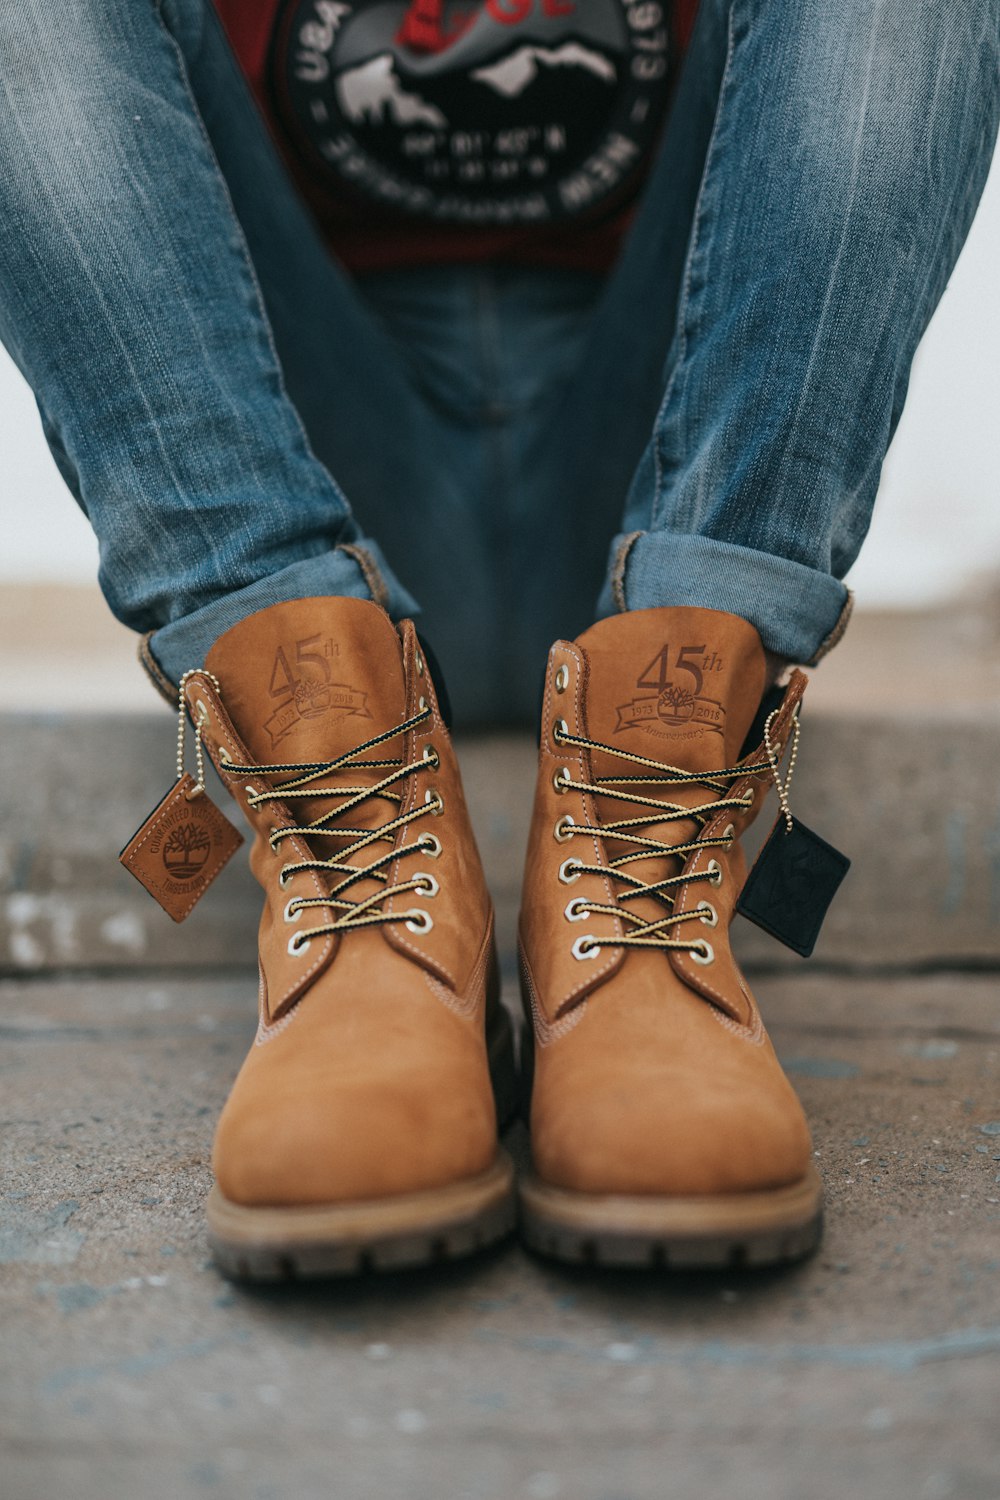 Pair of brown leather work boots photo – Free Boots Image on Unsplash